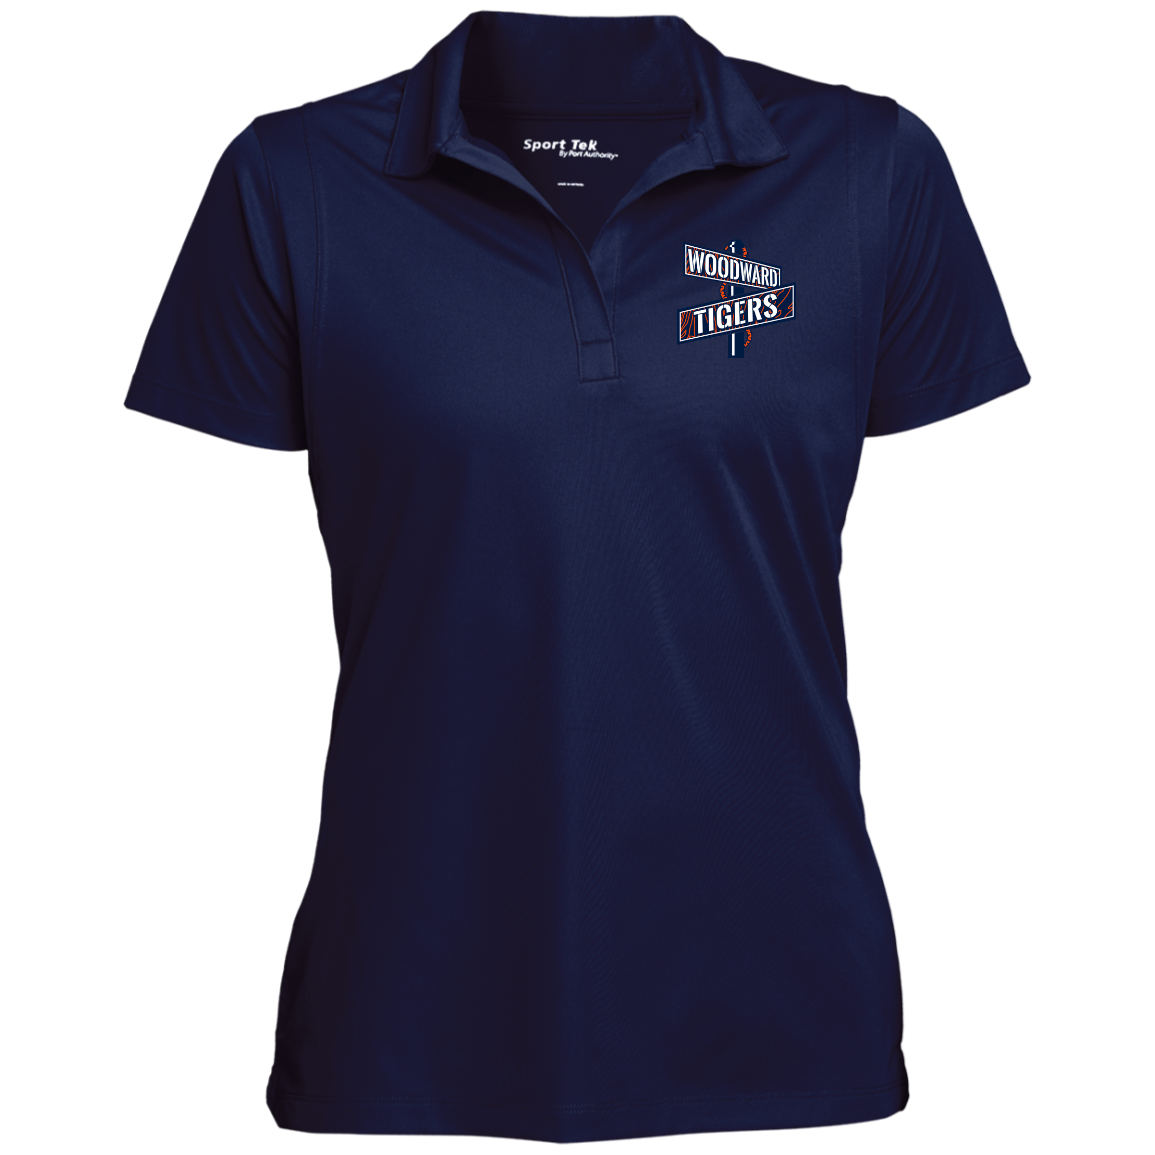 WOODWARD TIGERS Ladies' Micropique Sport-Wick® Polo